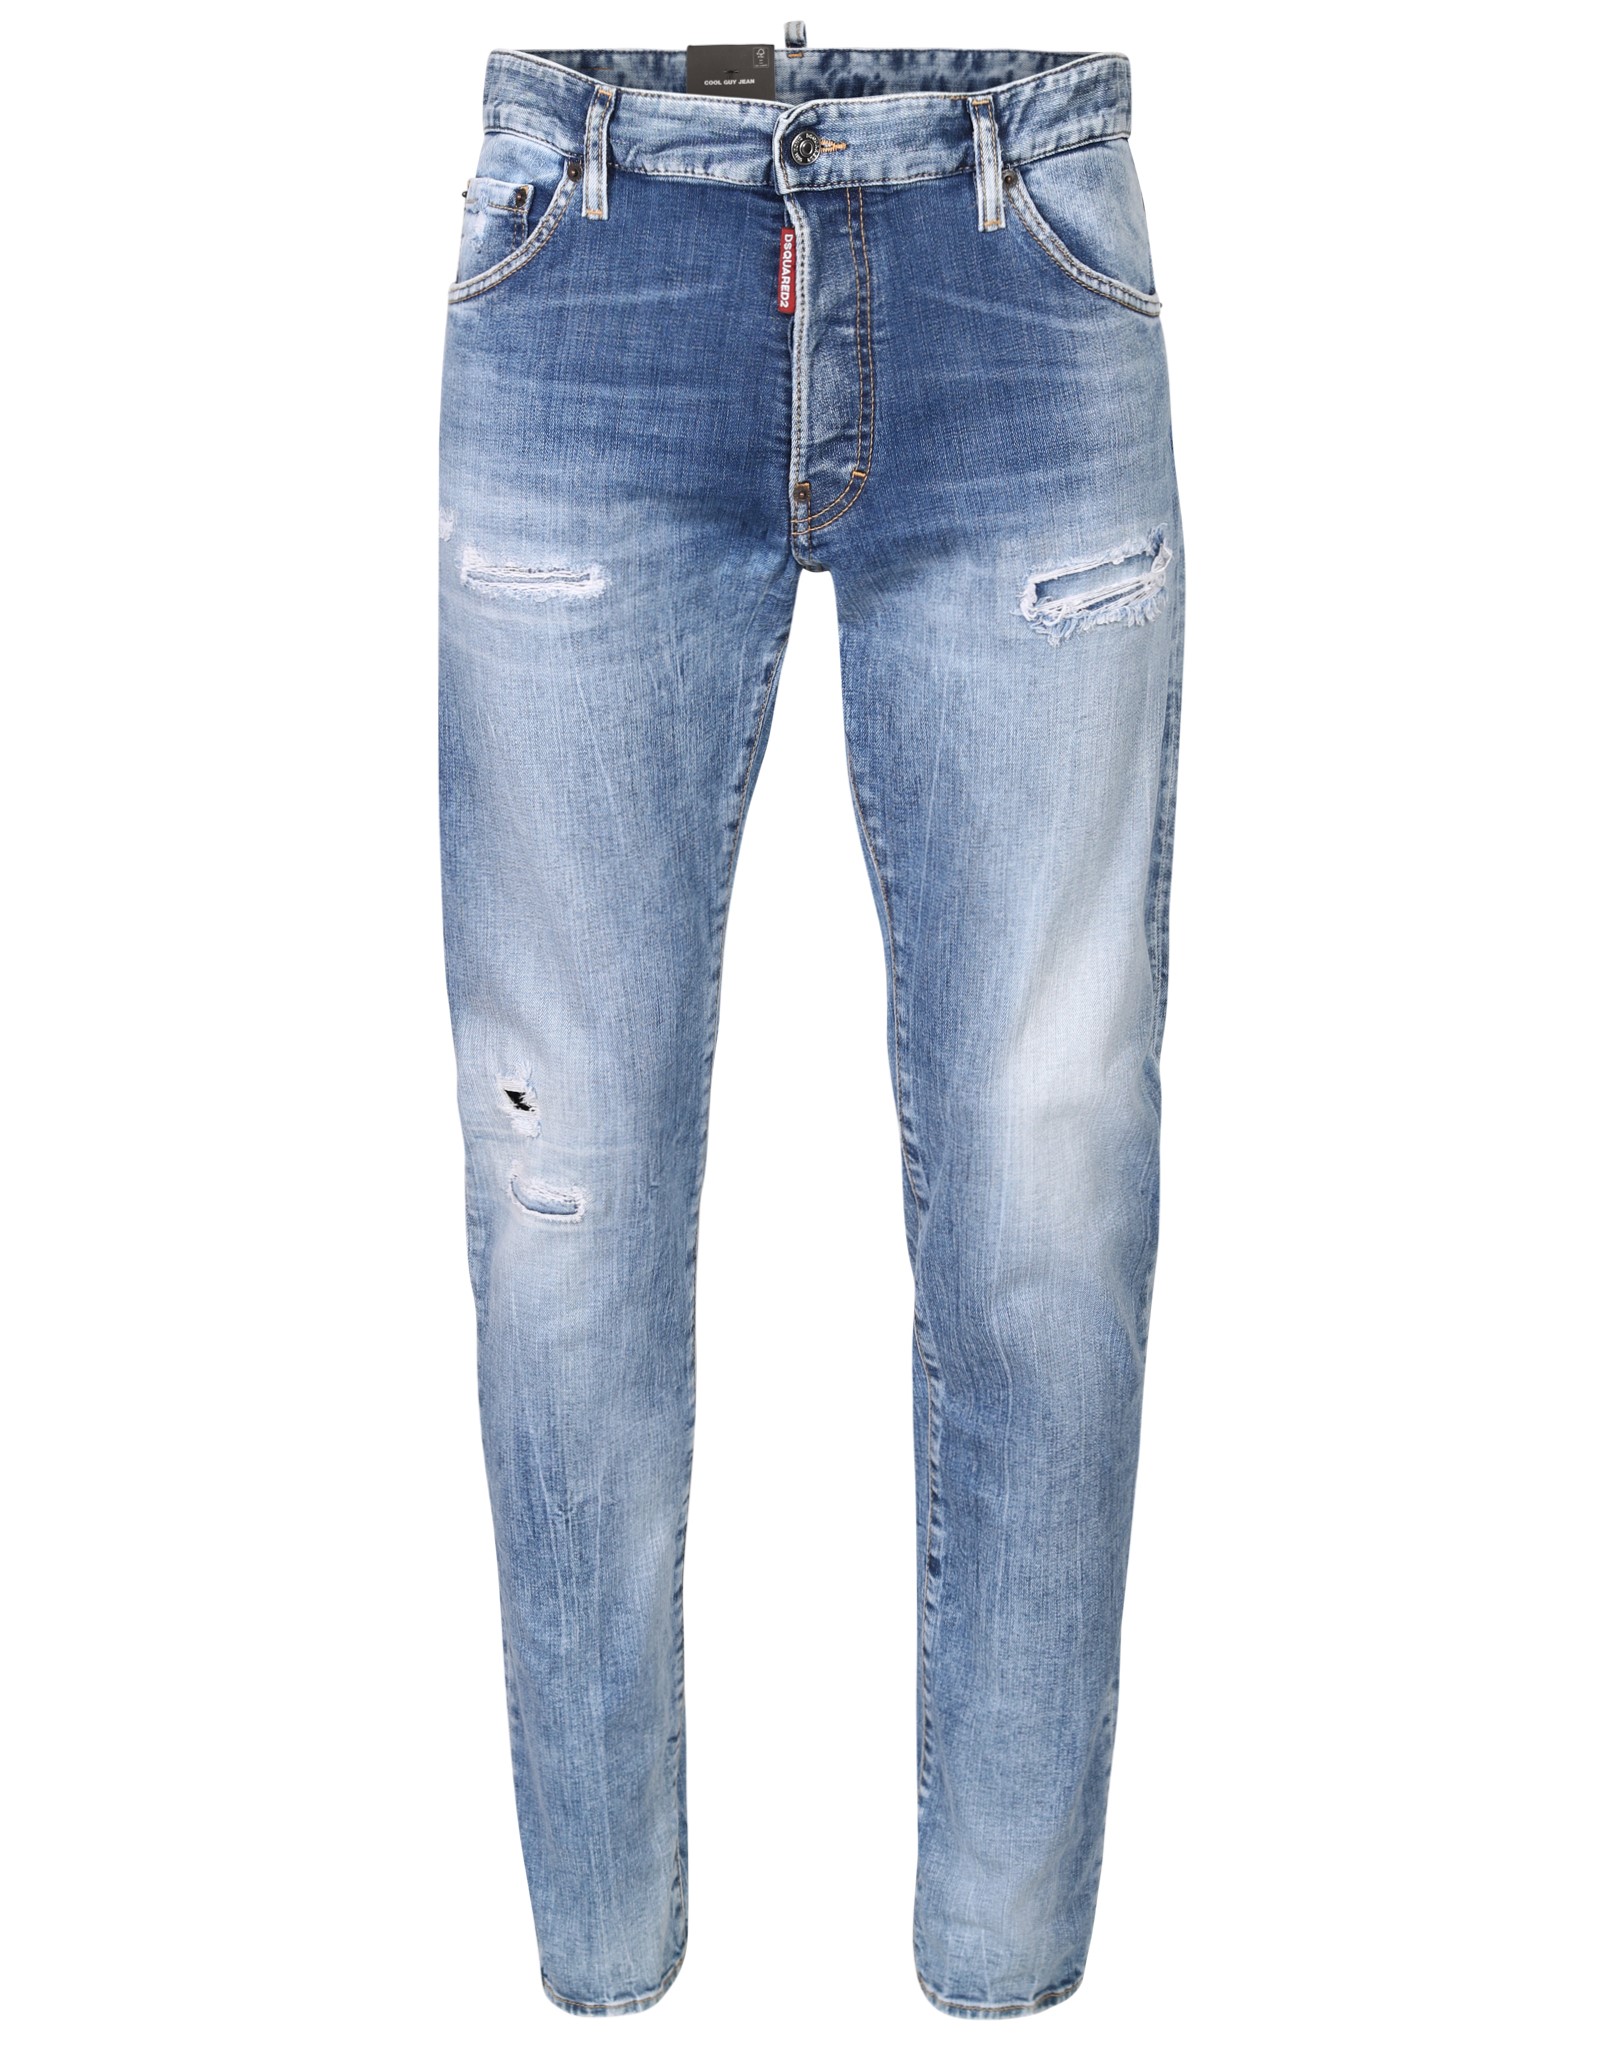 DSQUARED2 Cool Guy Jeans in Light Blue Washing 50